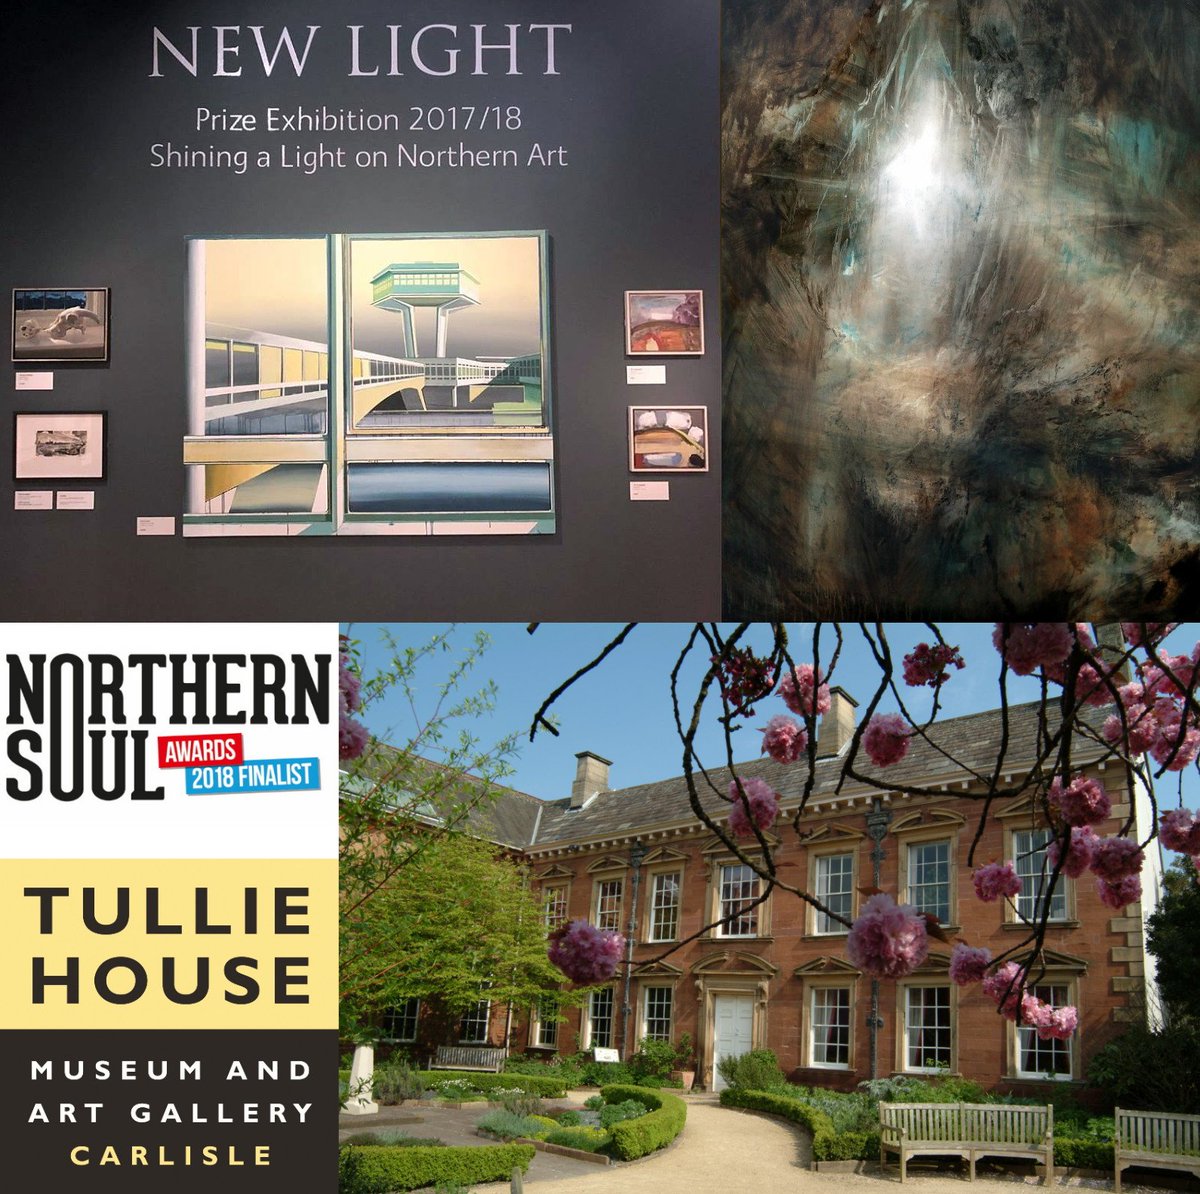 As the @Northern_Soul_ #awards creep ever nearer it seems the perfect time to read @mconnollywriter review of @TullieHouse leg of the exhibition, with a few wise words from our CEO @e_mpainter and selected artist @Jamesnaughtart  bit.ly/2B3Lfpx